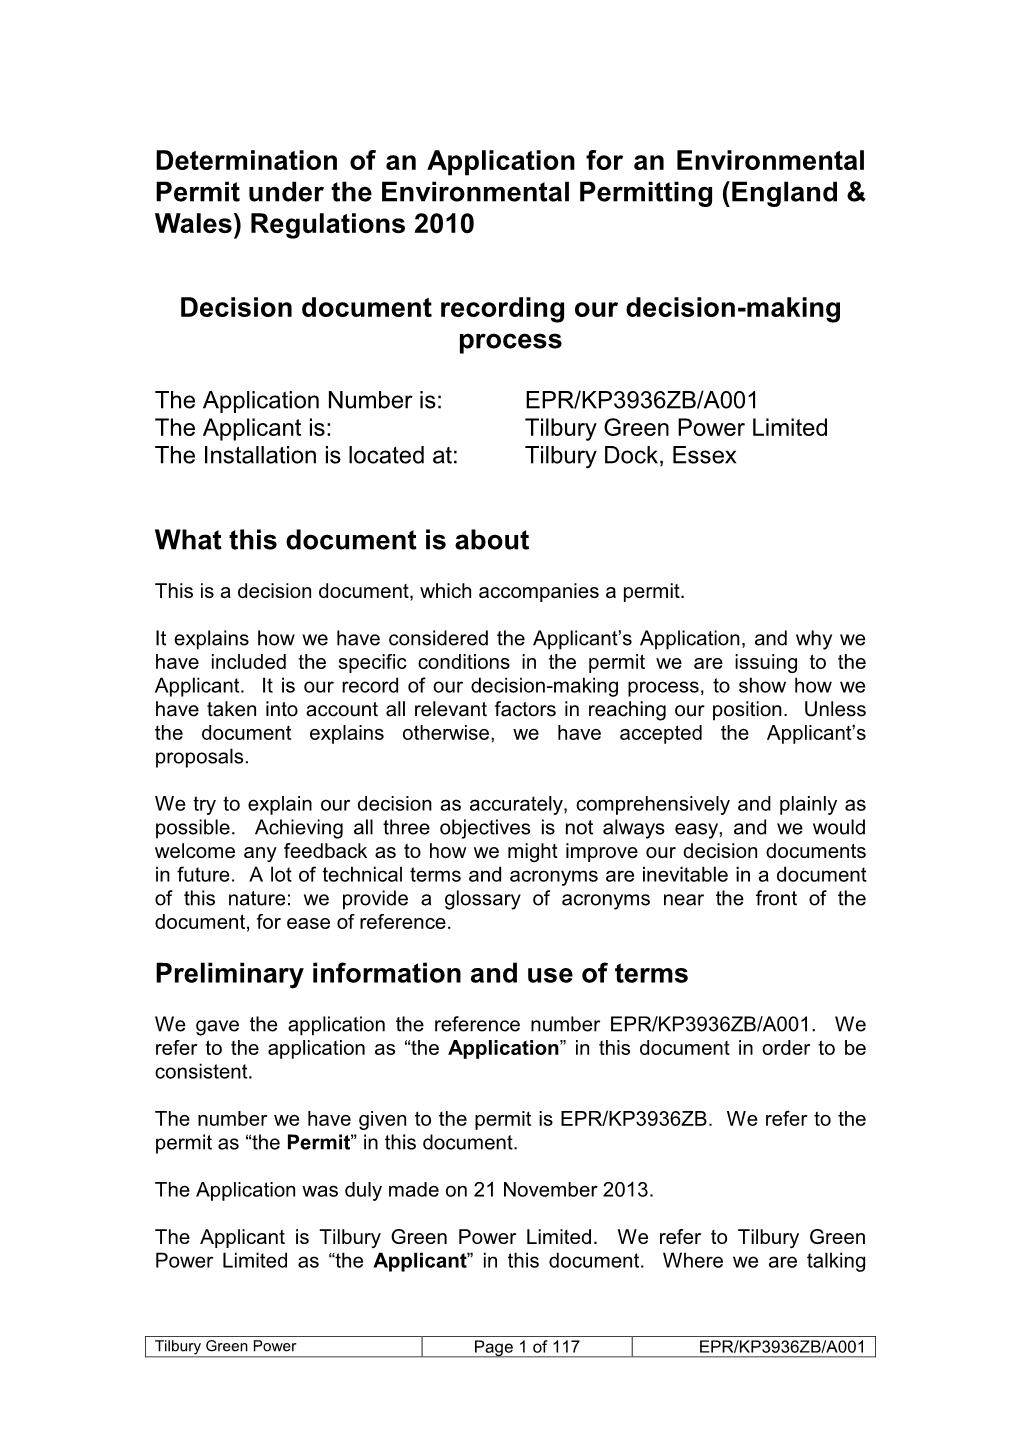 Decision Document: Tilbury Green Power Limited